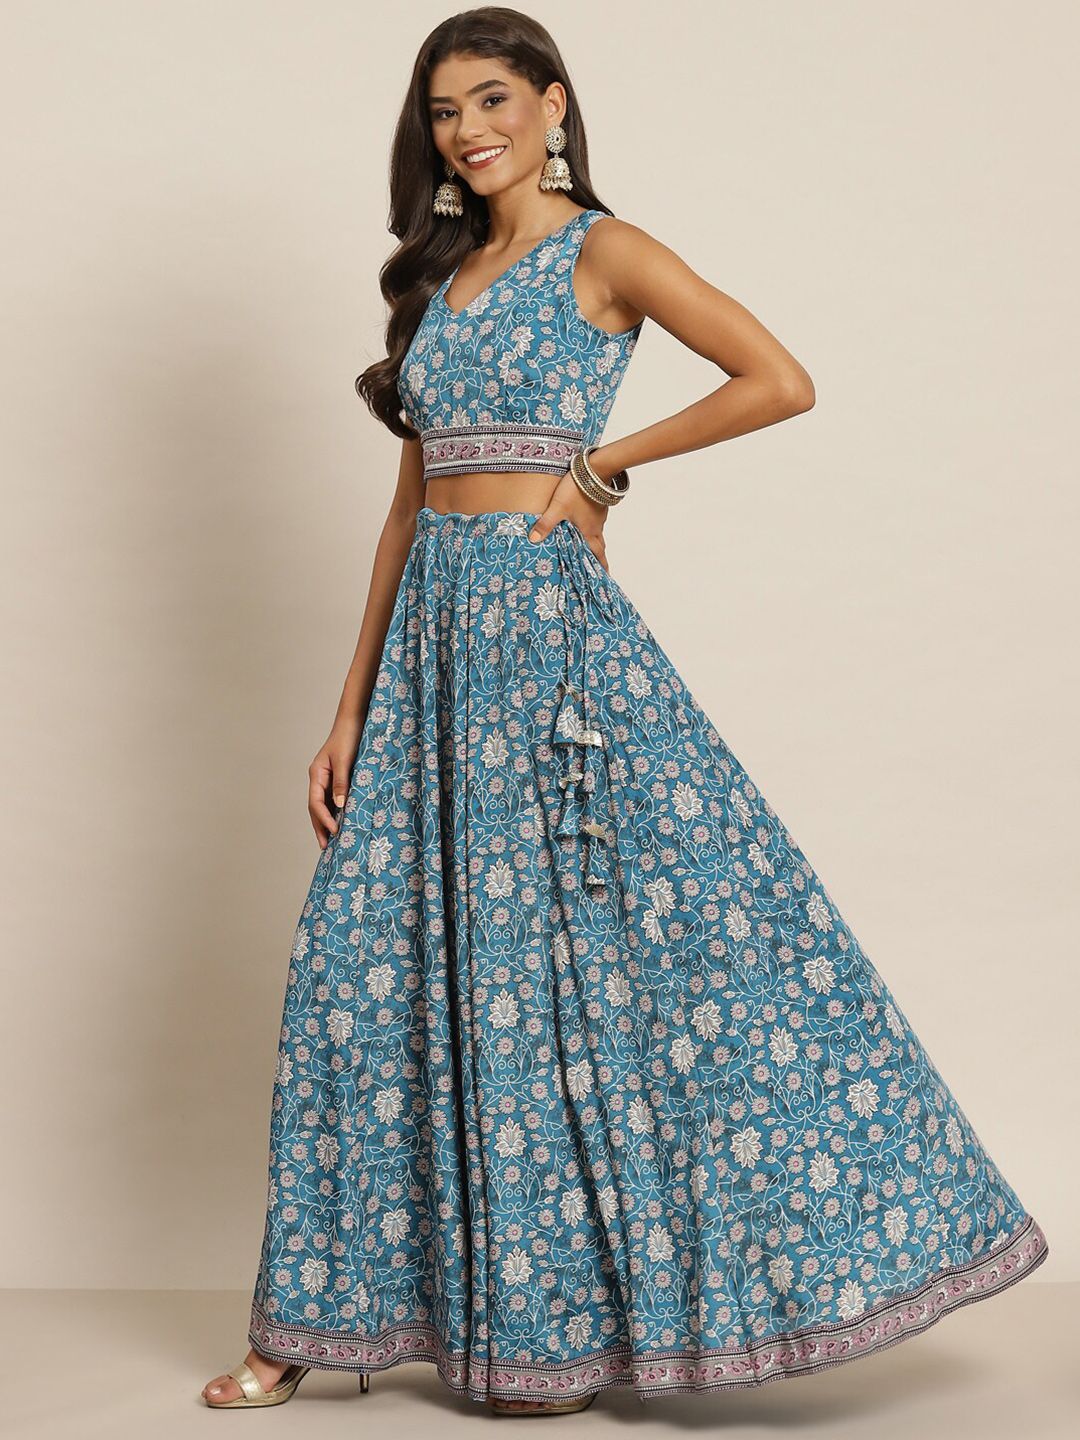 Shae by SASSAFRAS Teal & Pink Printed Ready to Wear Lehenga Price in India